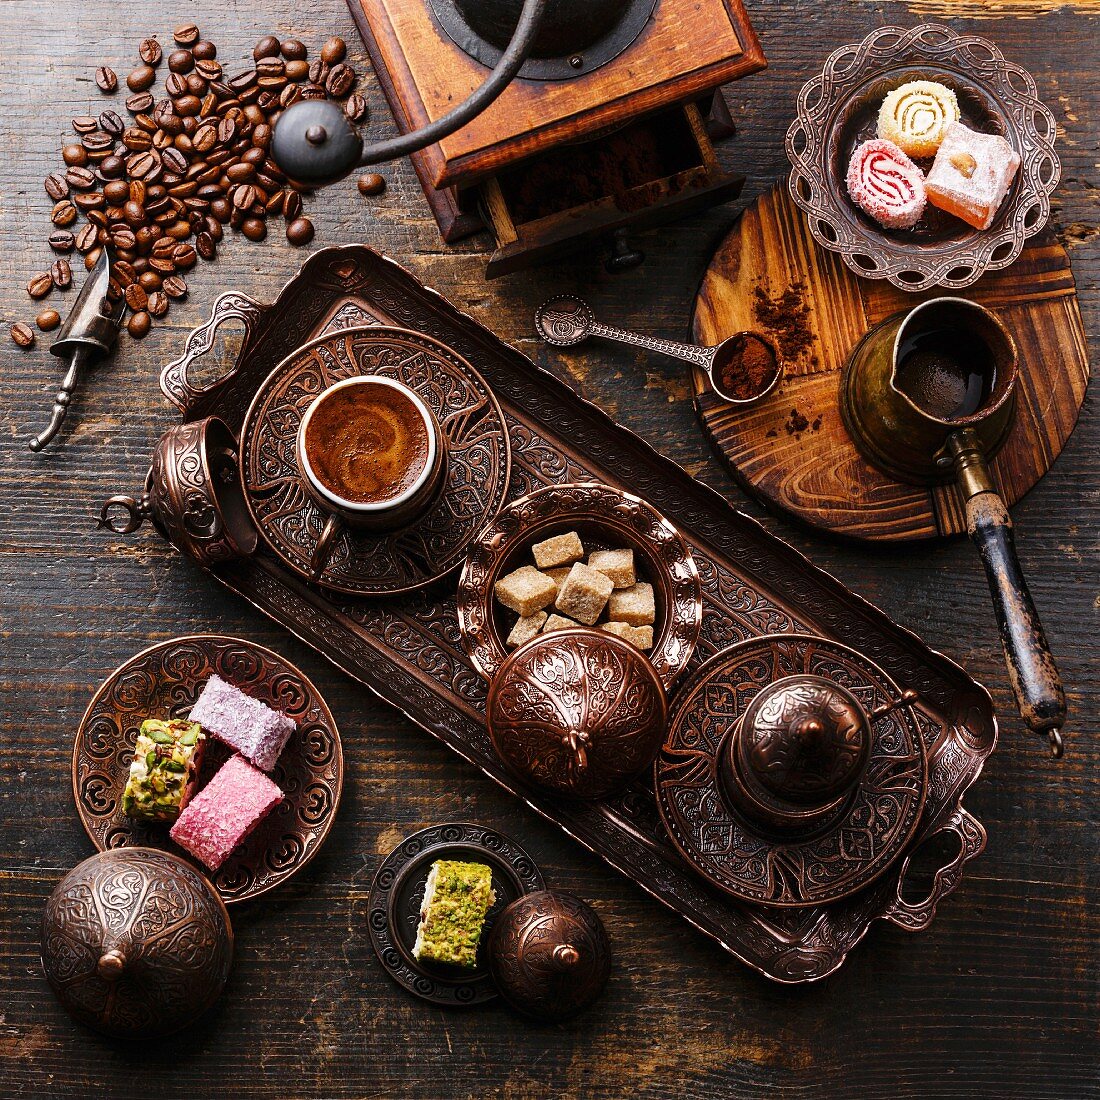 Coffee-east and Turkish Delight on copper tray on wooden background